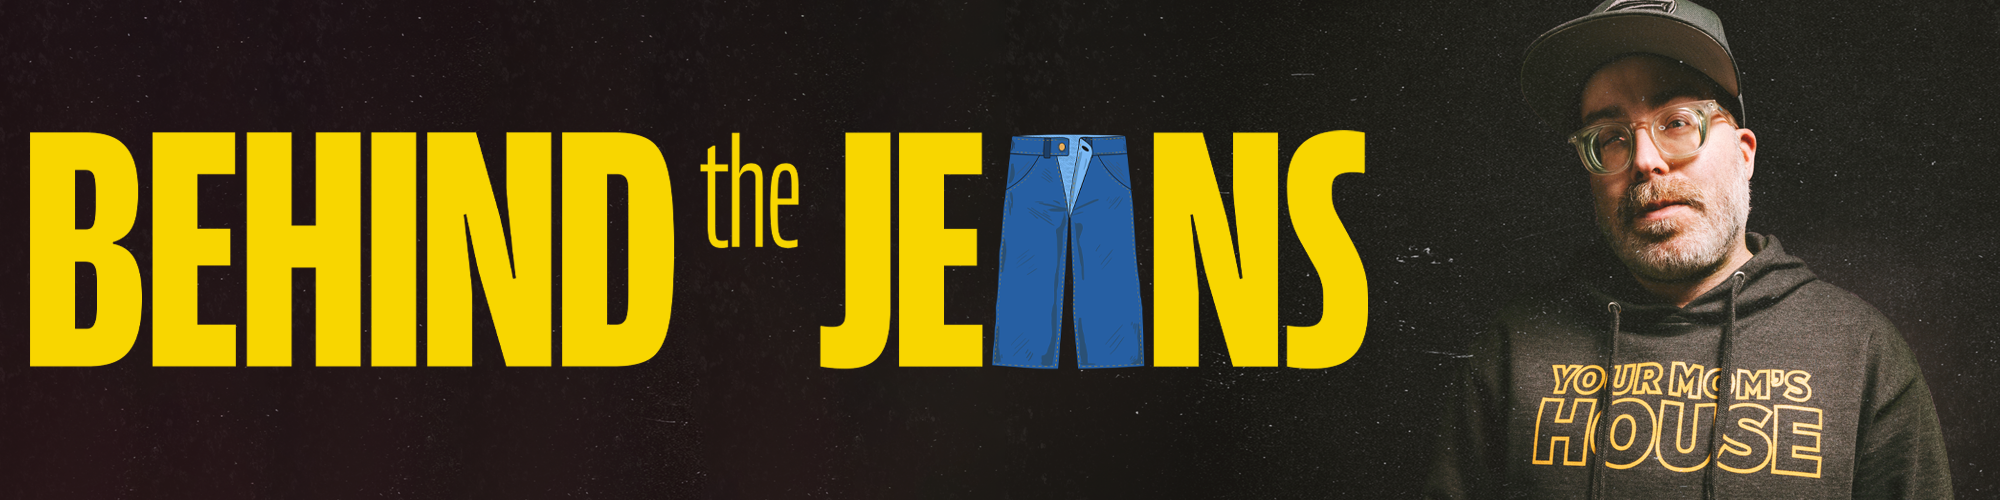 YMH Page Headers - Behind the Jeans